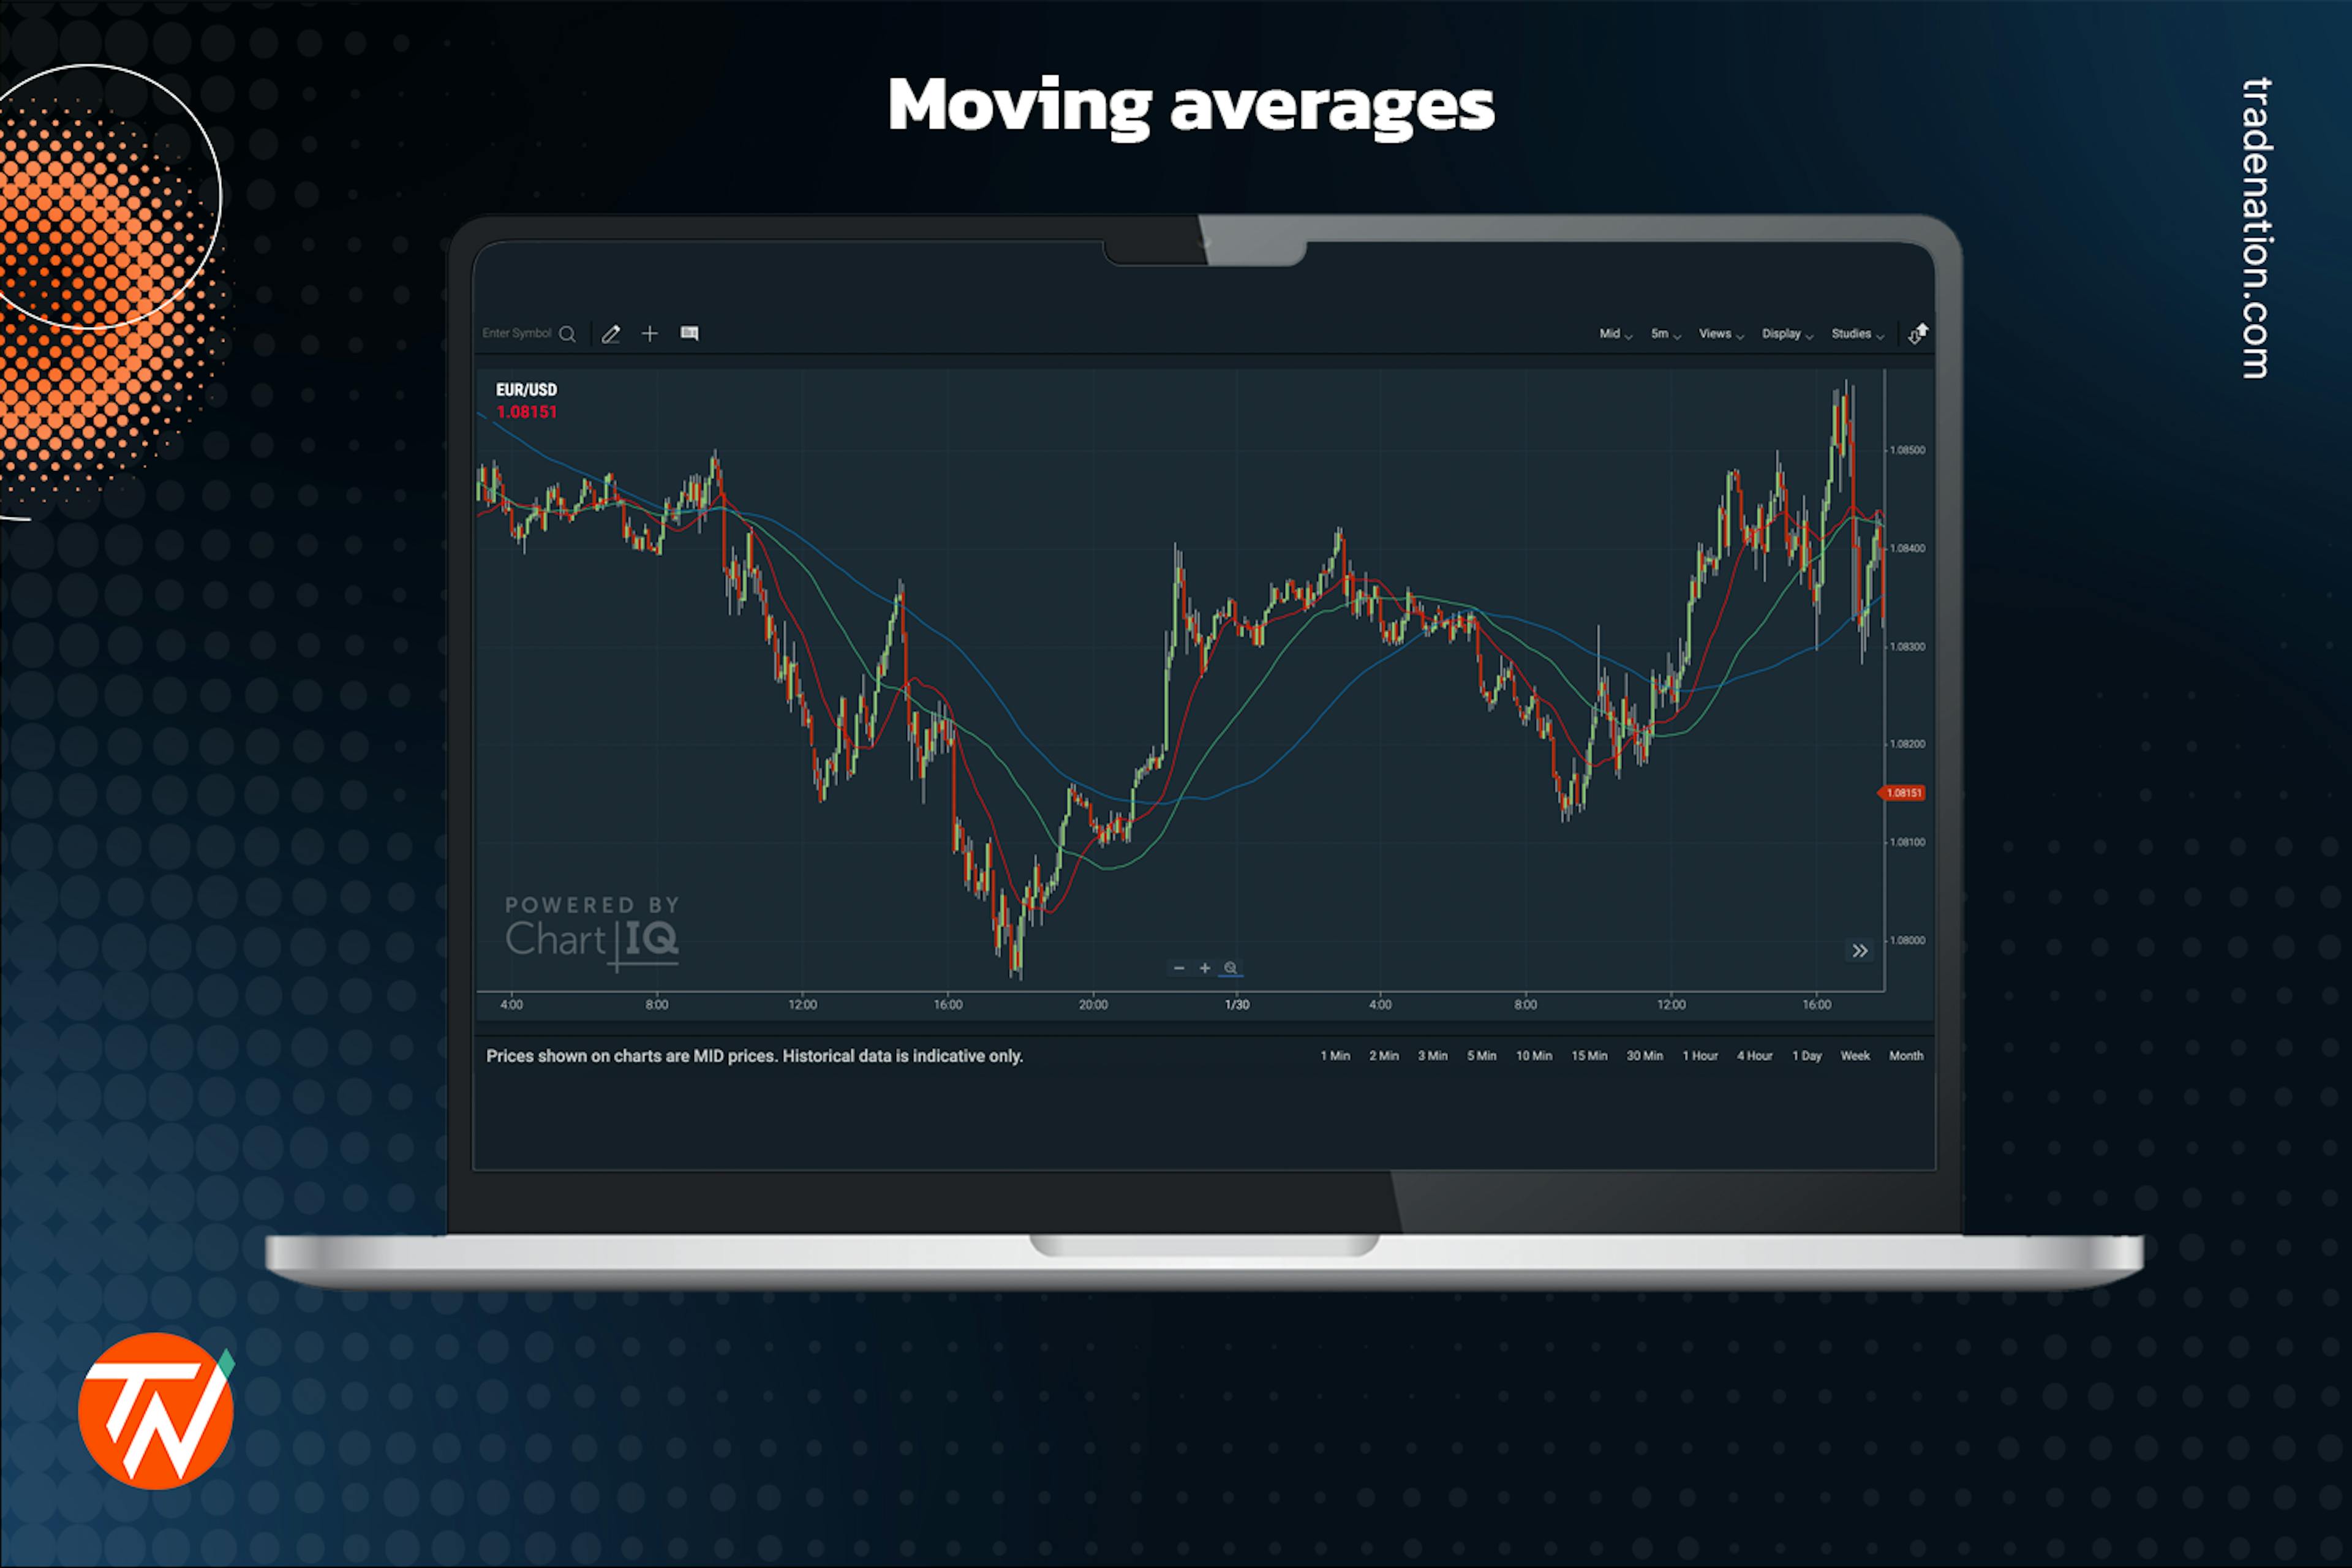 Moving averages in trading demonstrated